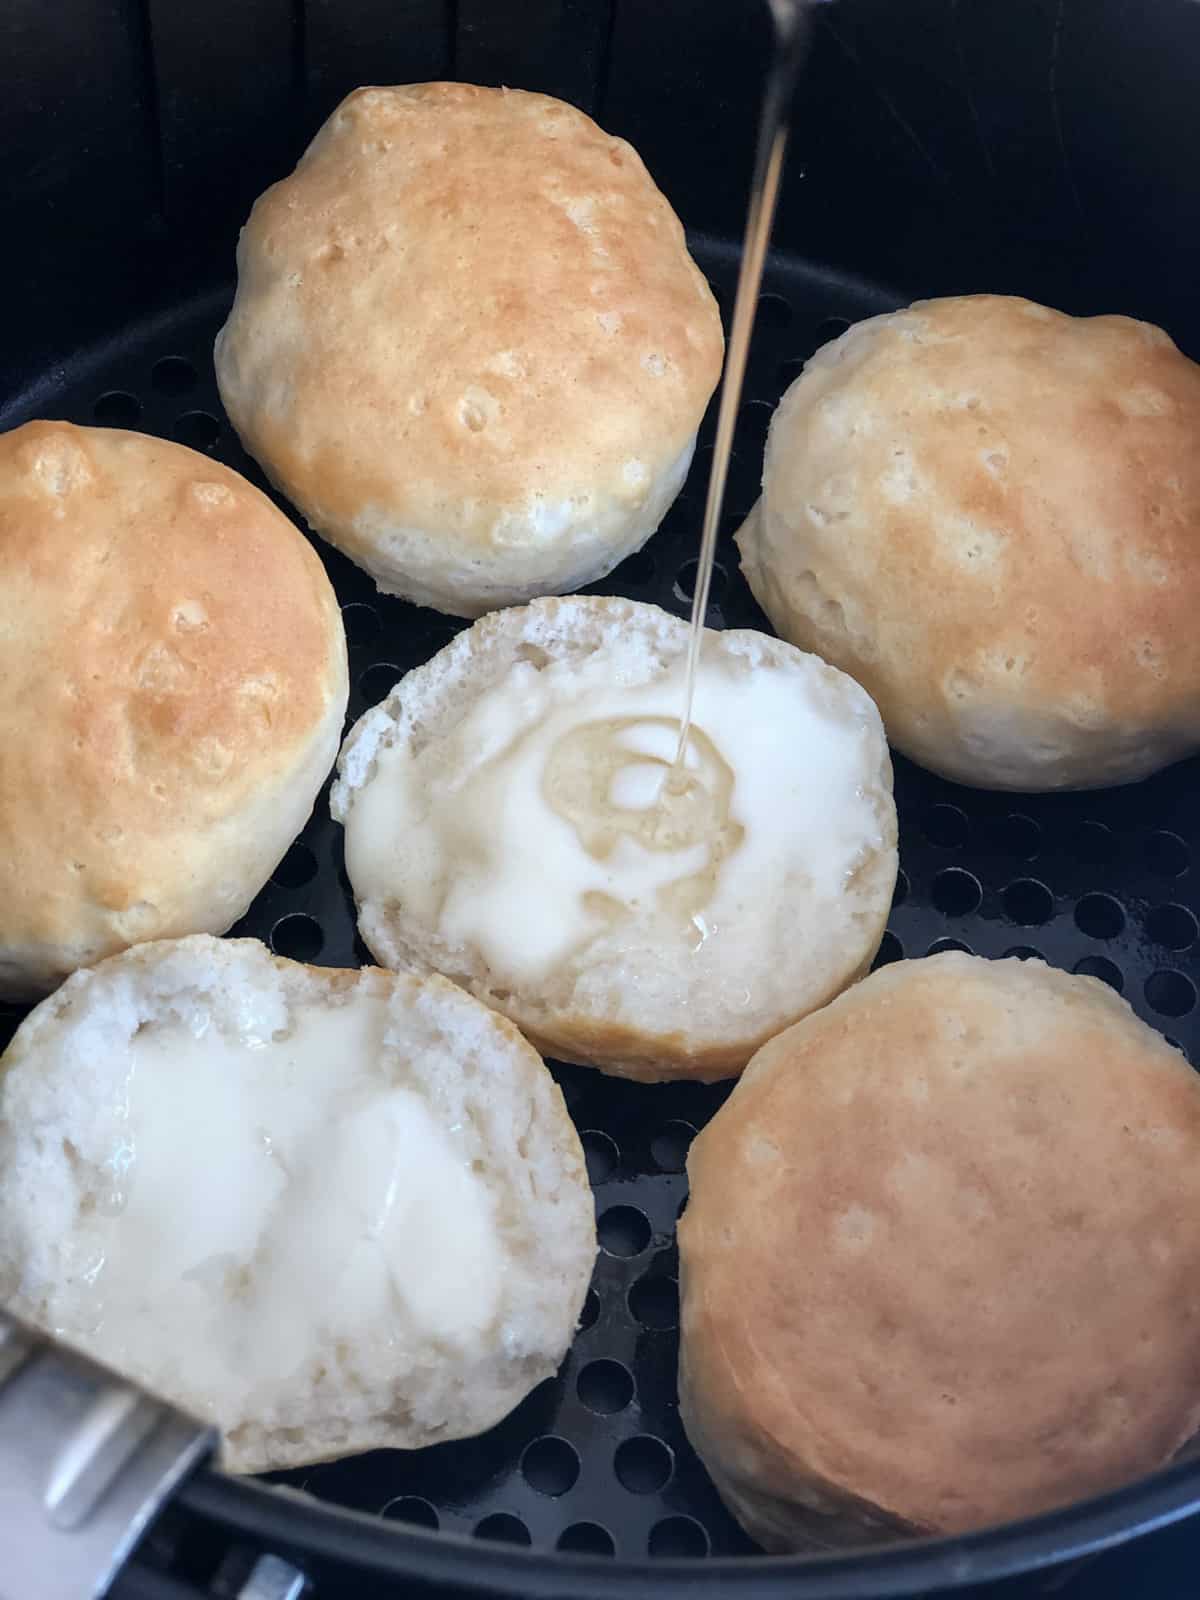 Biscuits in an air fryer slathered in butter with a drizzle of honey.